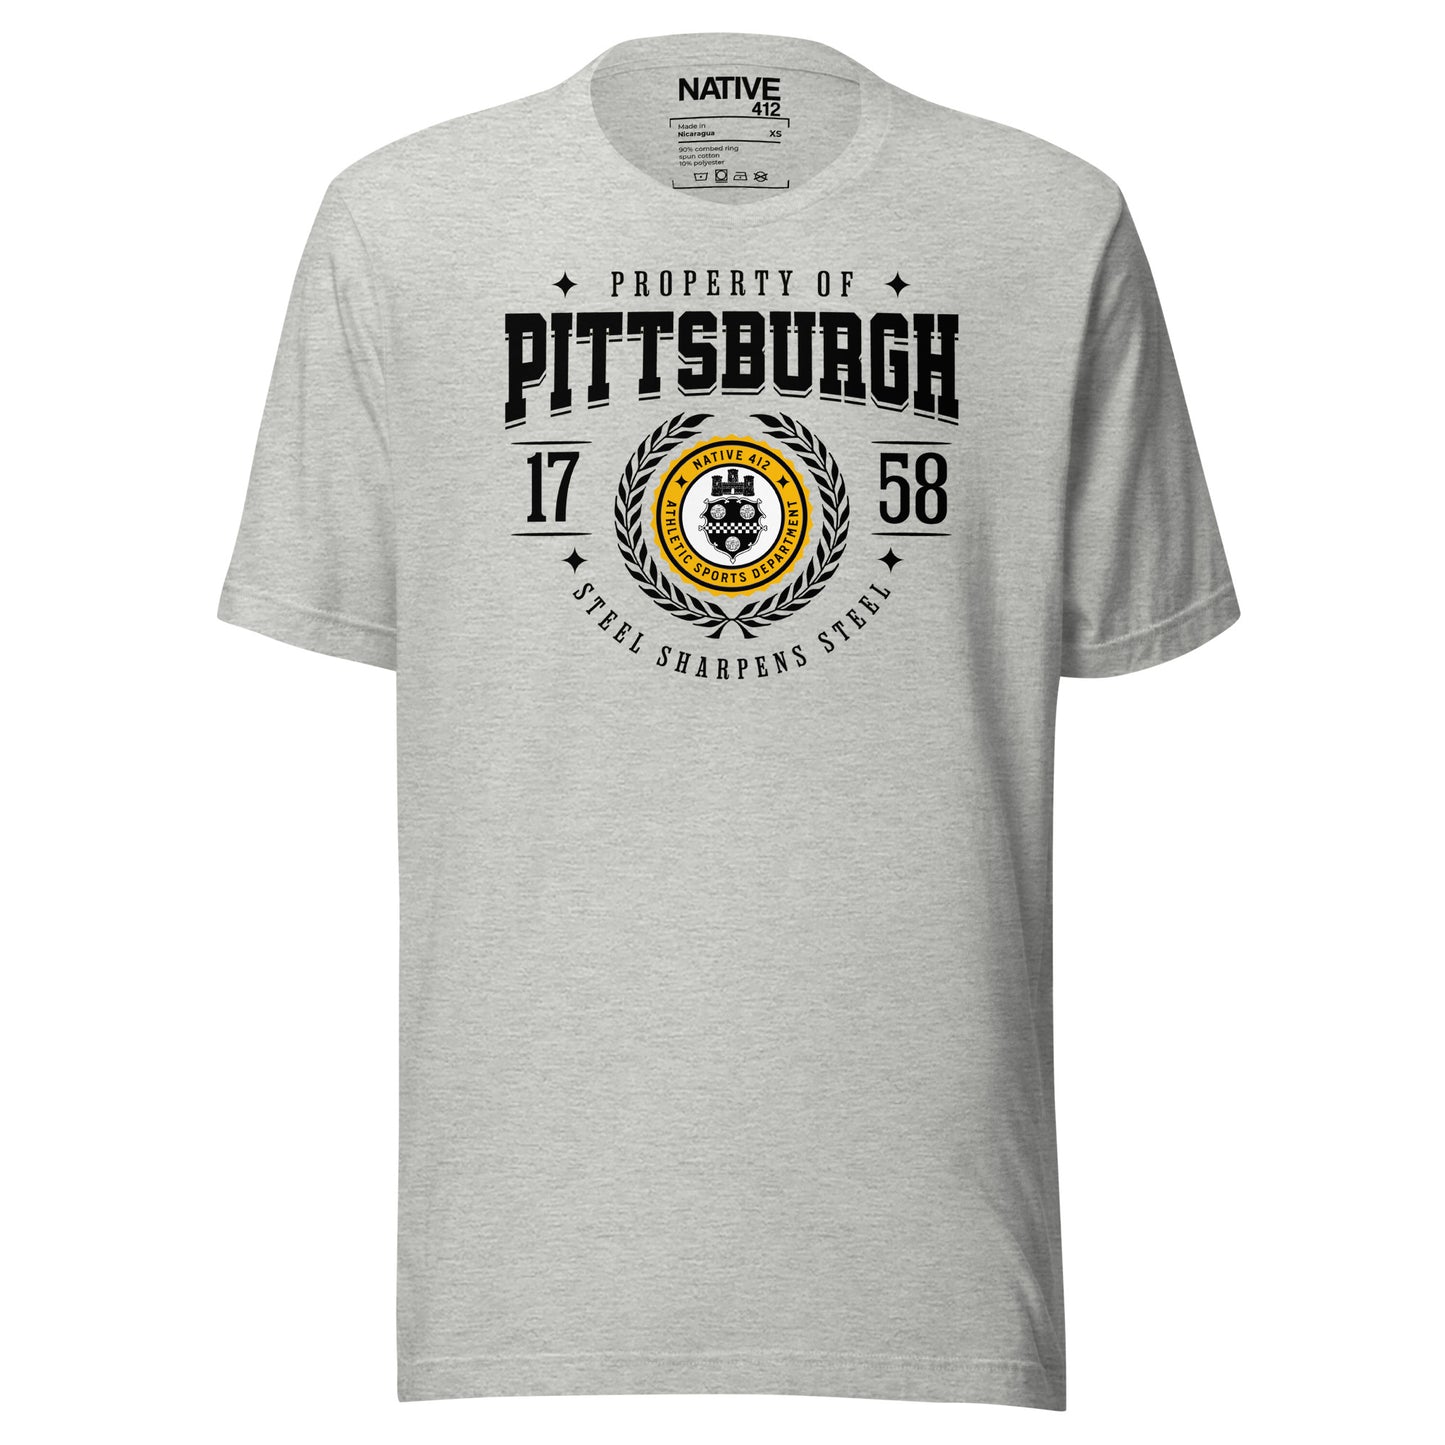 Property of Pittsburgh - Steel Sharpens Steel Athletic Grey Unisex t-shirt